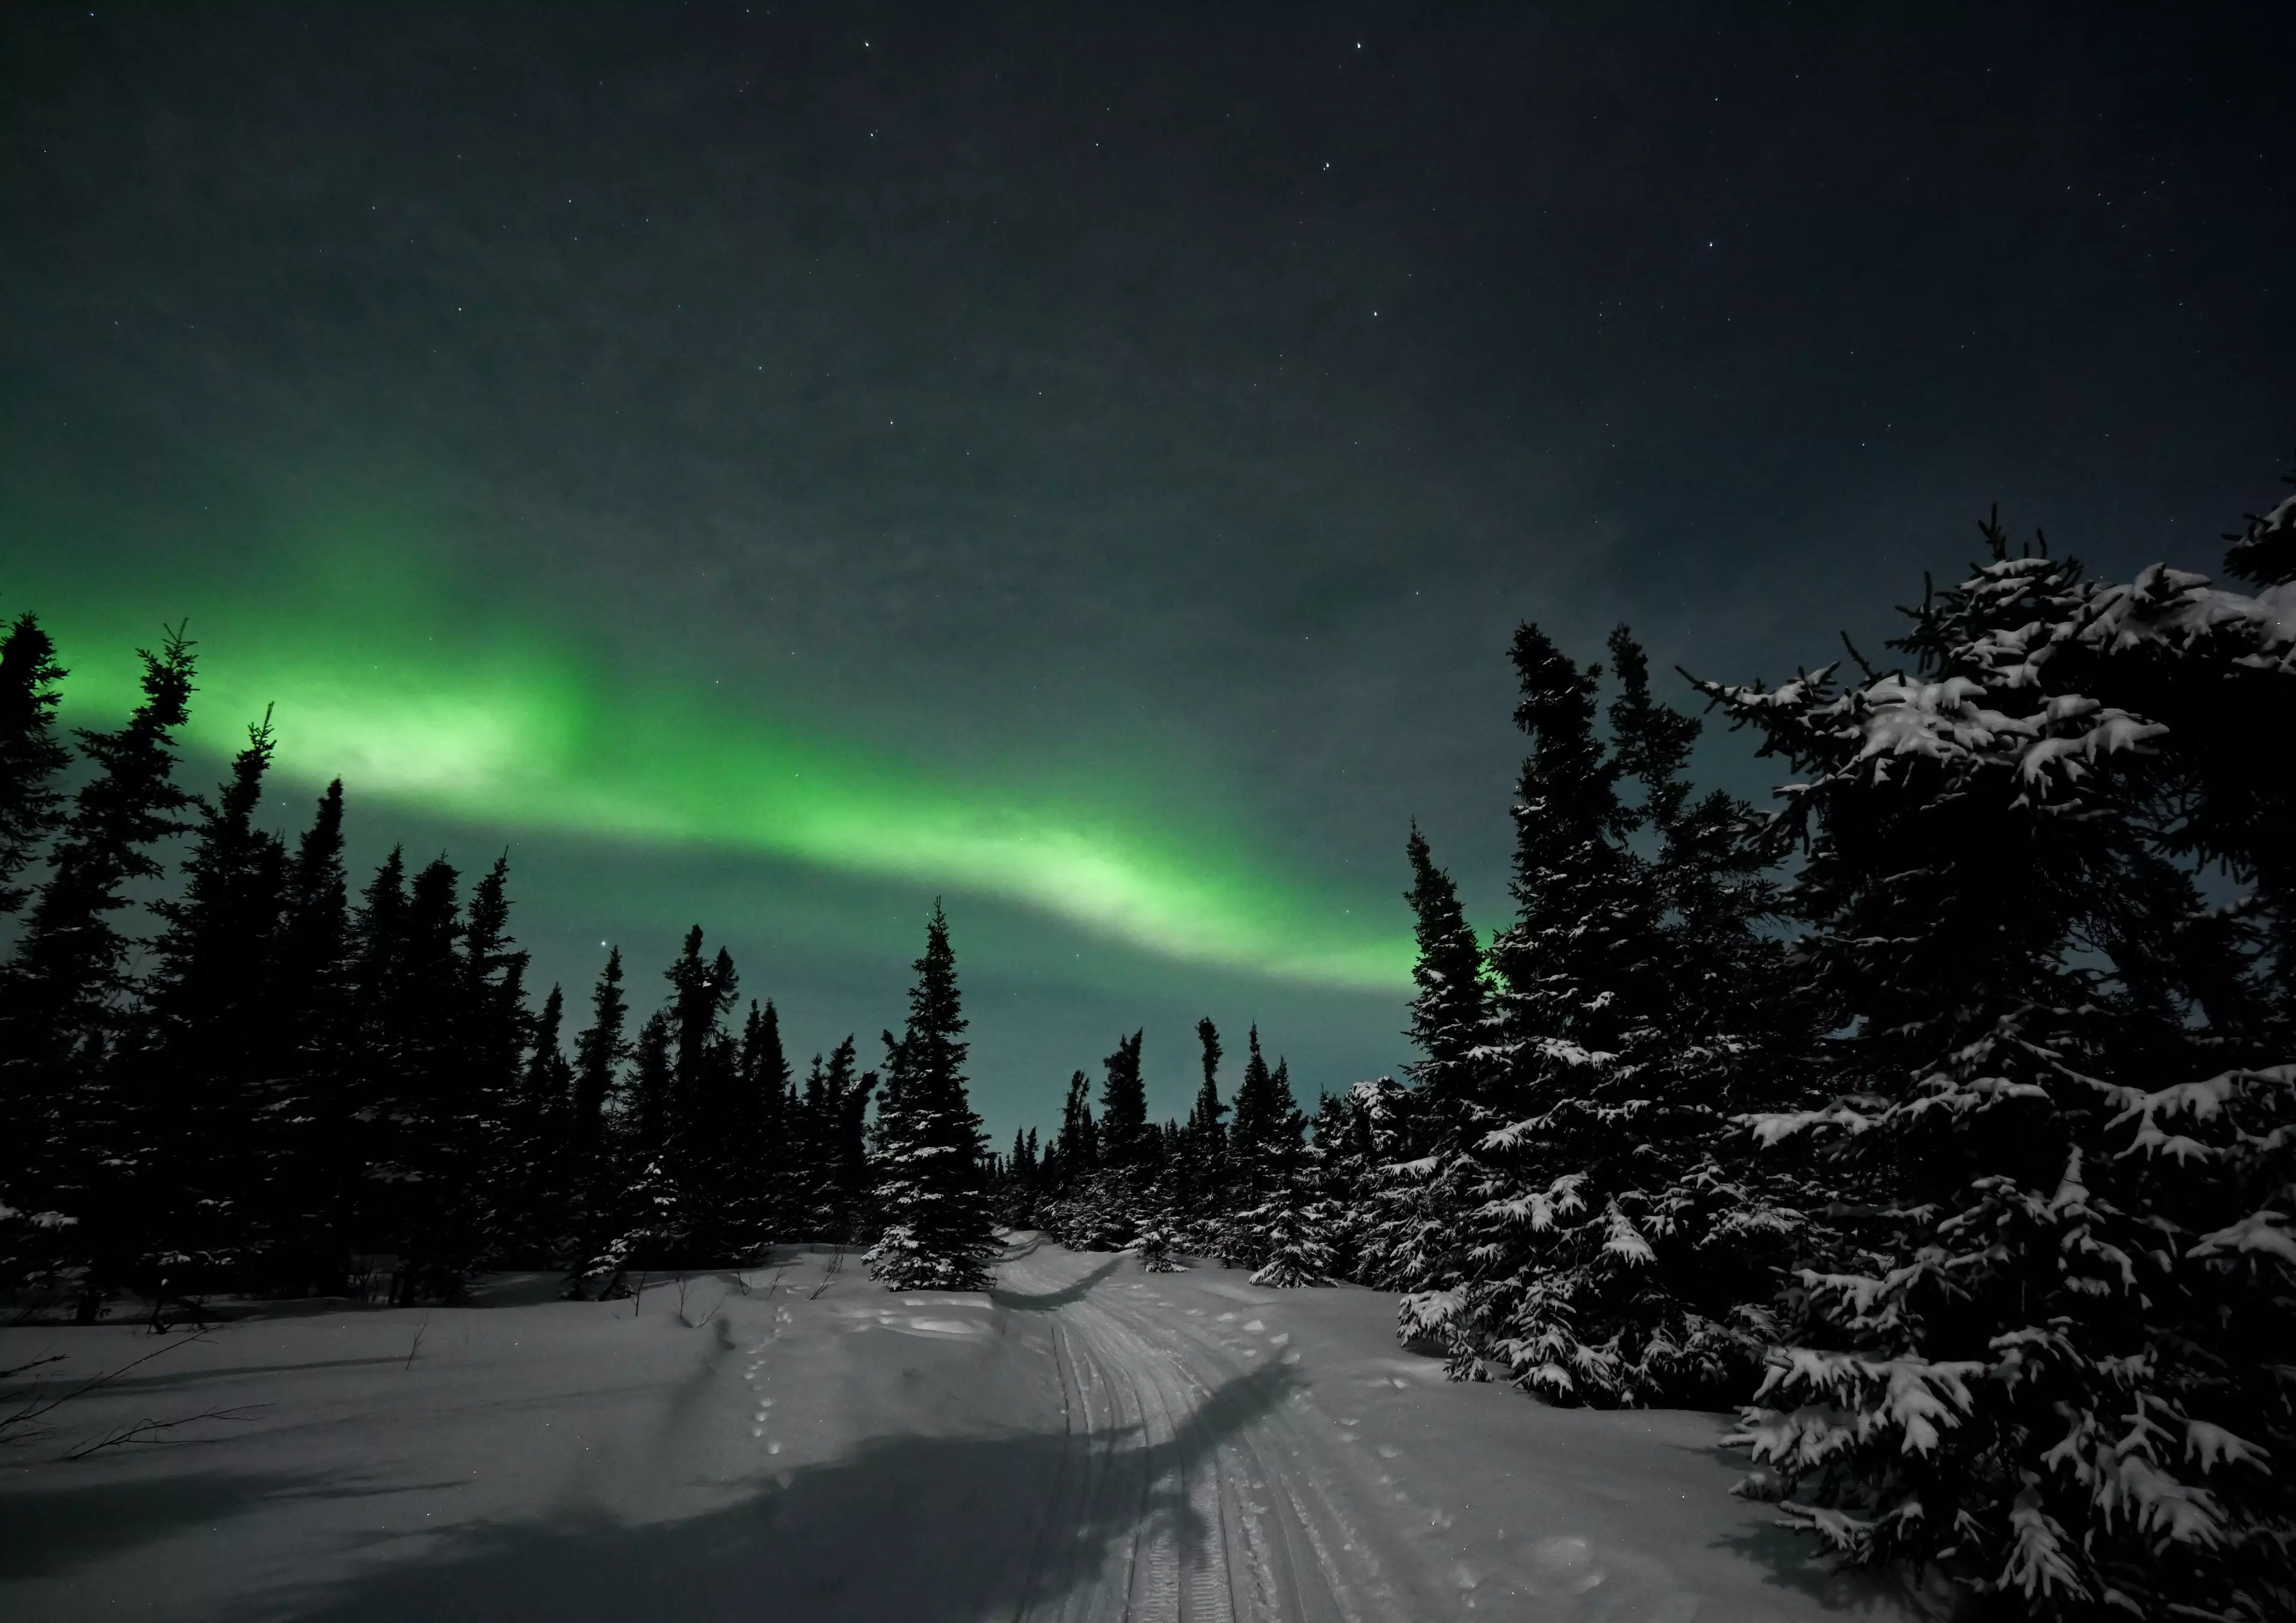 If you're lucky, you might just see a glimpse of the Northern Lights tonight.